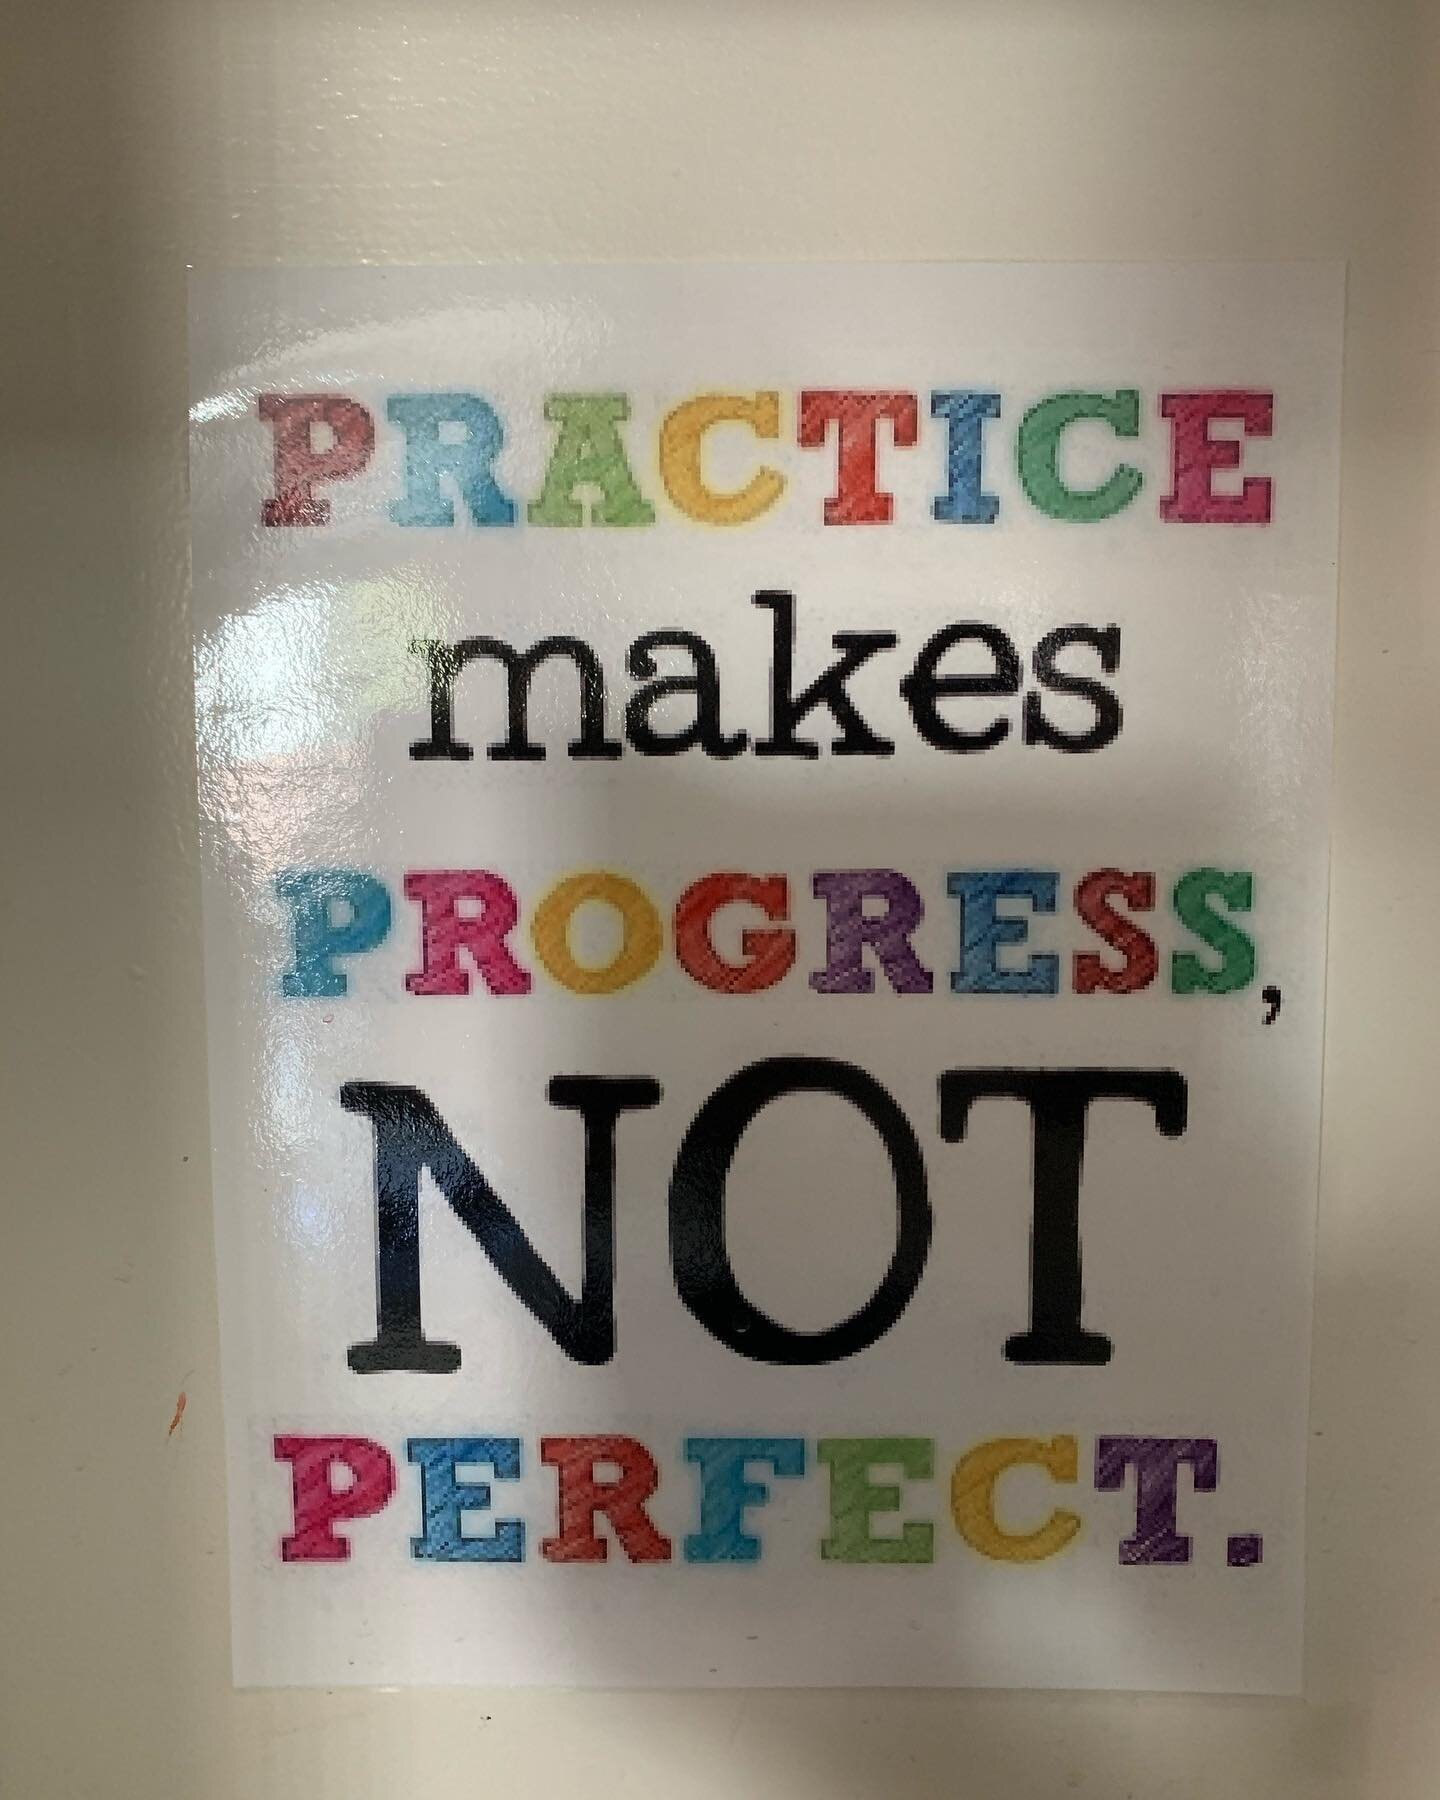 Some reminders from local elementary school classrooms ❤️ #backtobasics #students #progress #mistakesarelessons